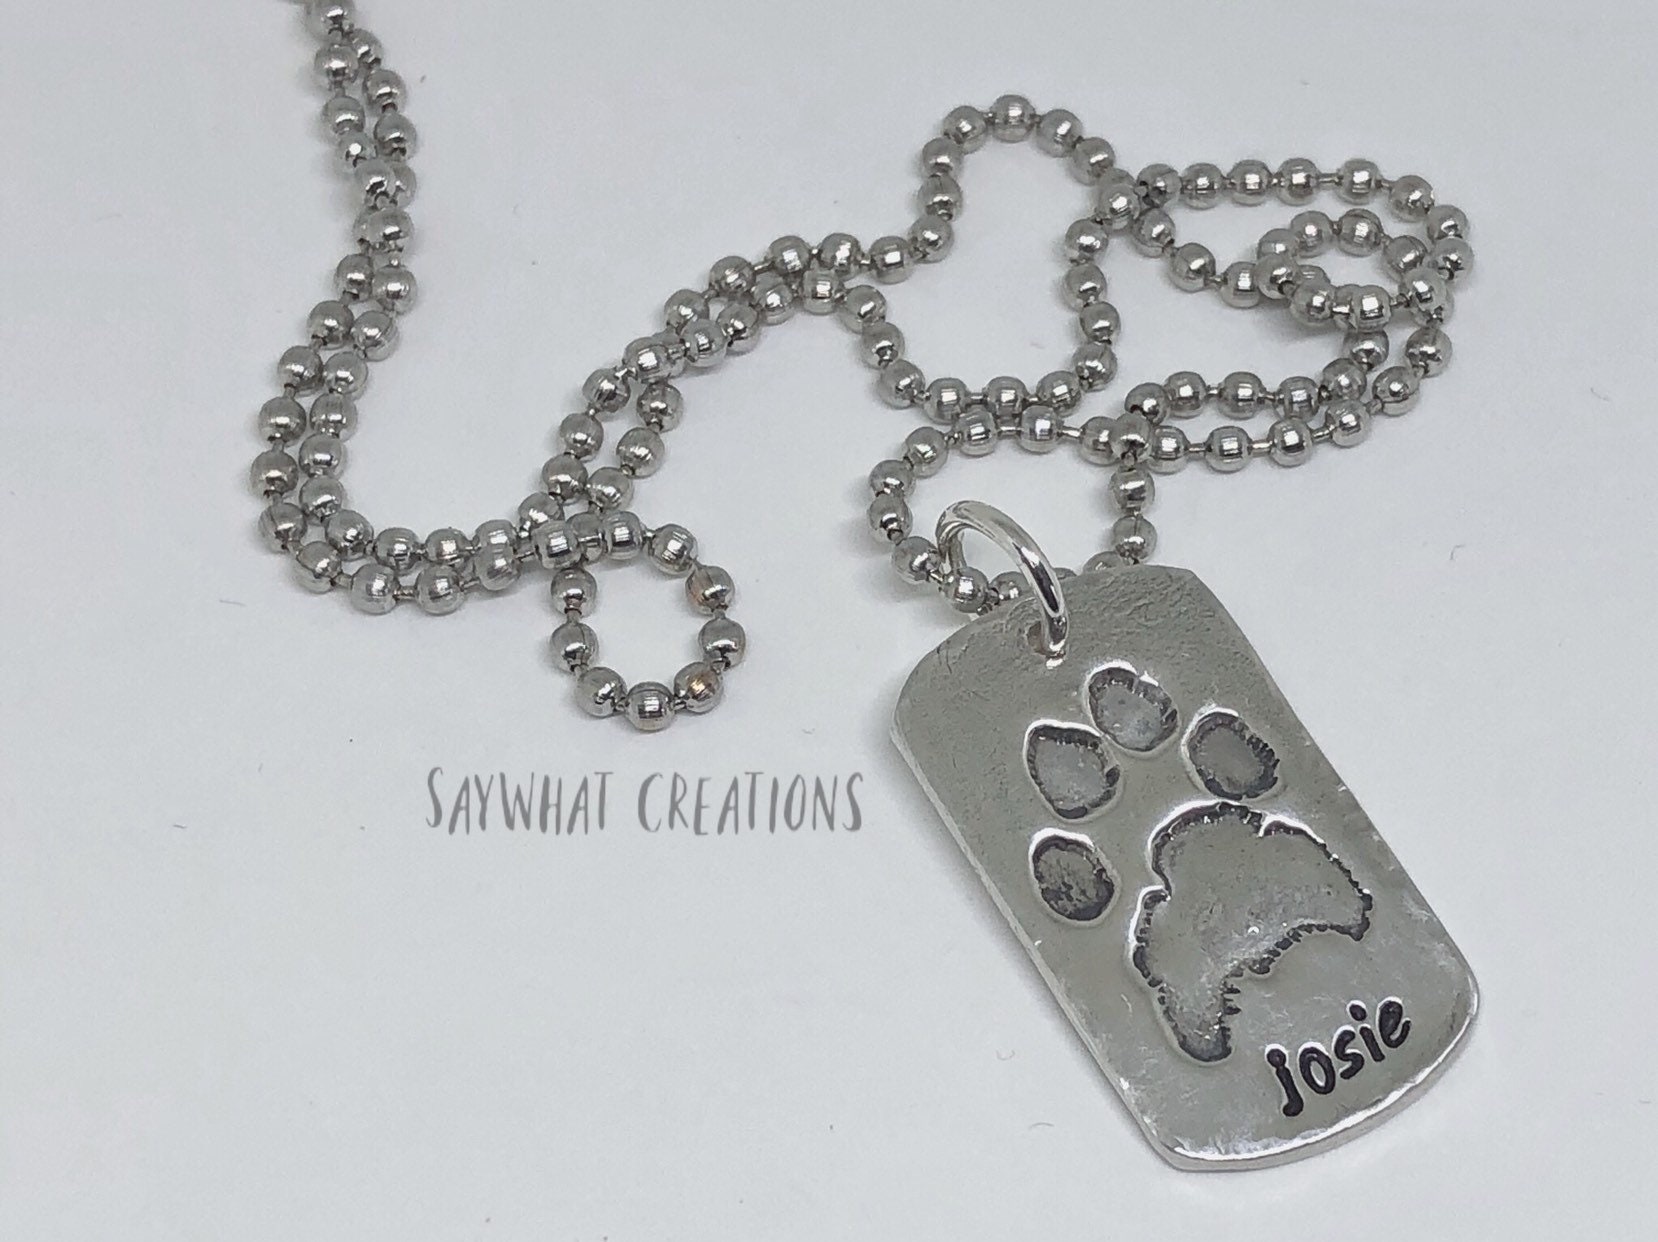 Boy's Dog Tag Sterling Silver Necklace - in Season Jewelry